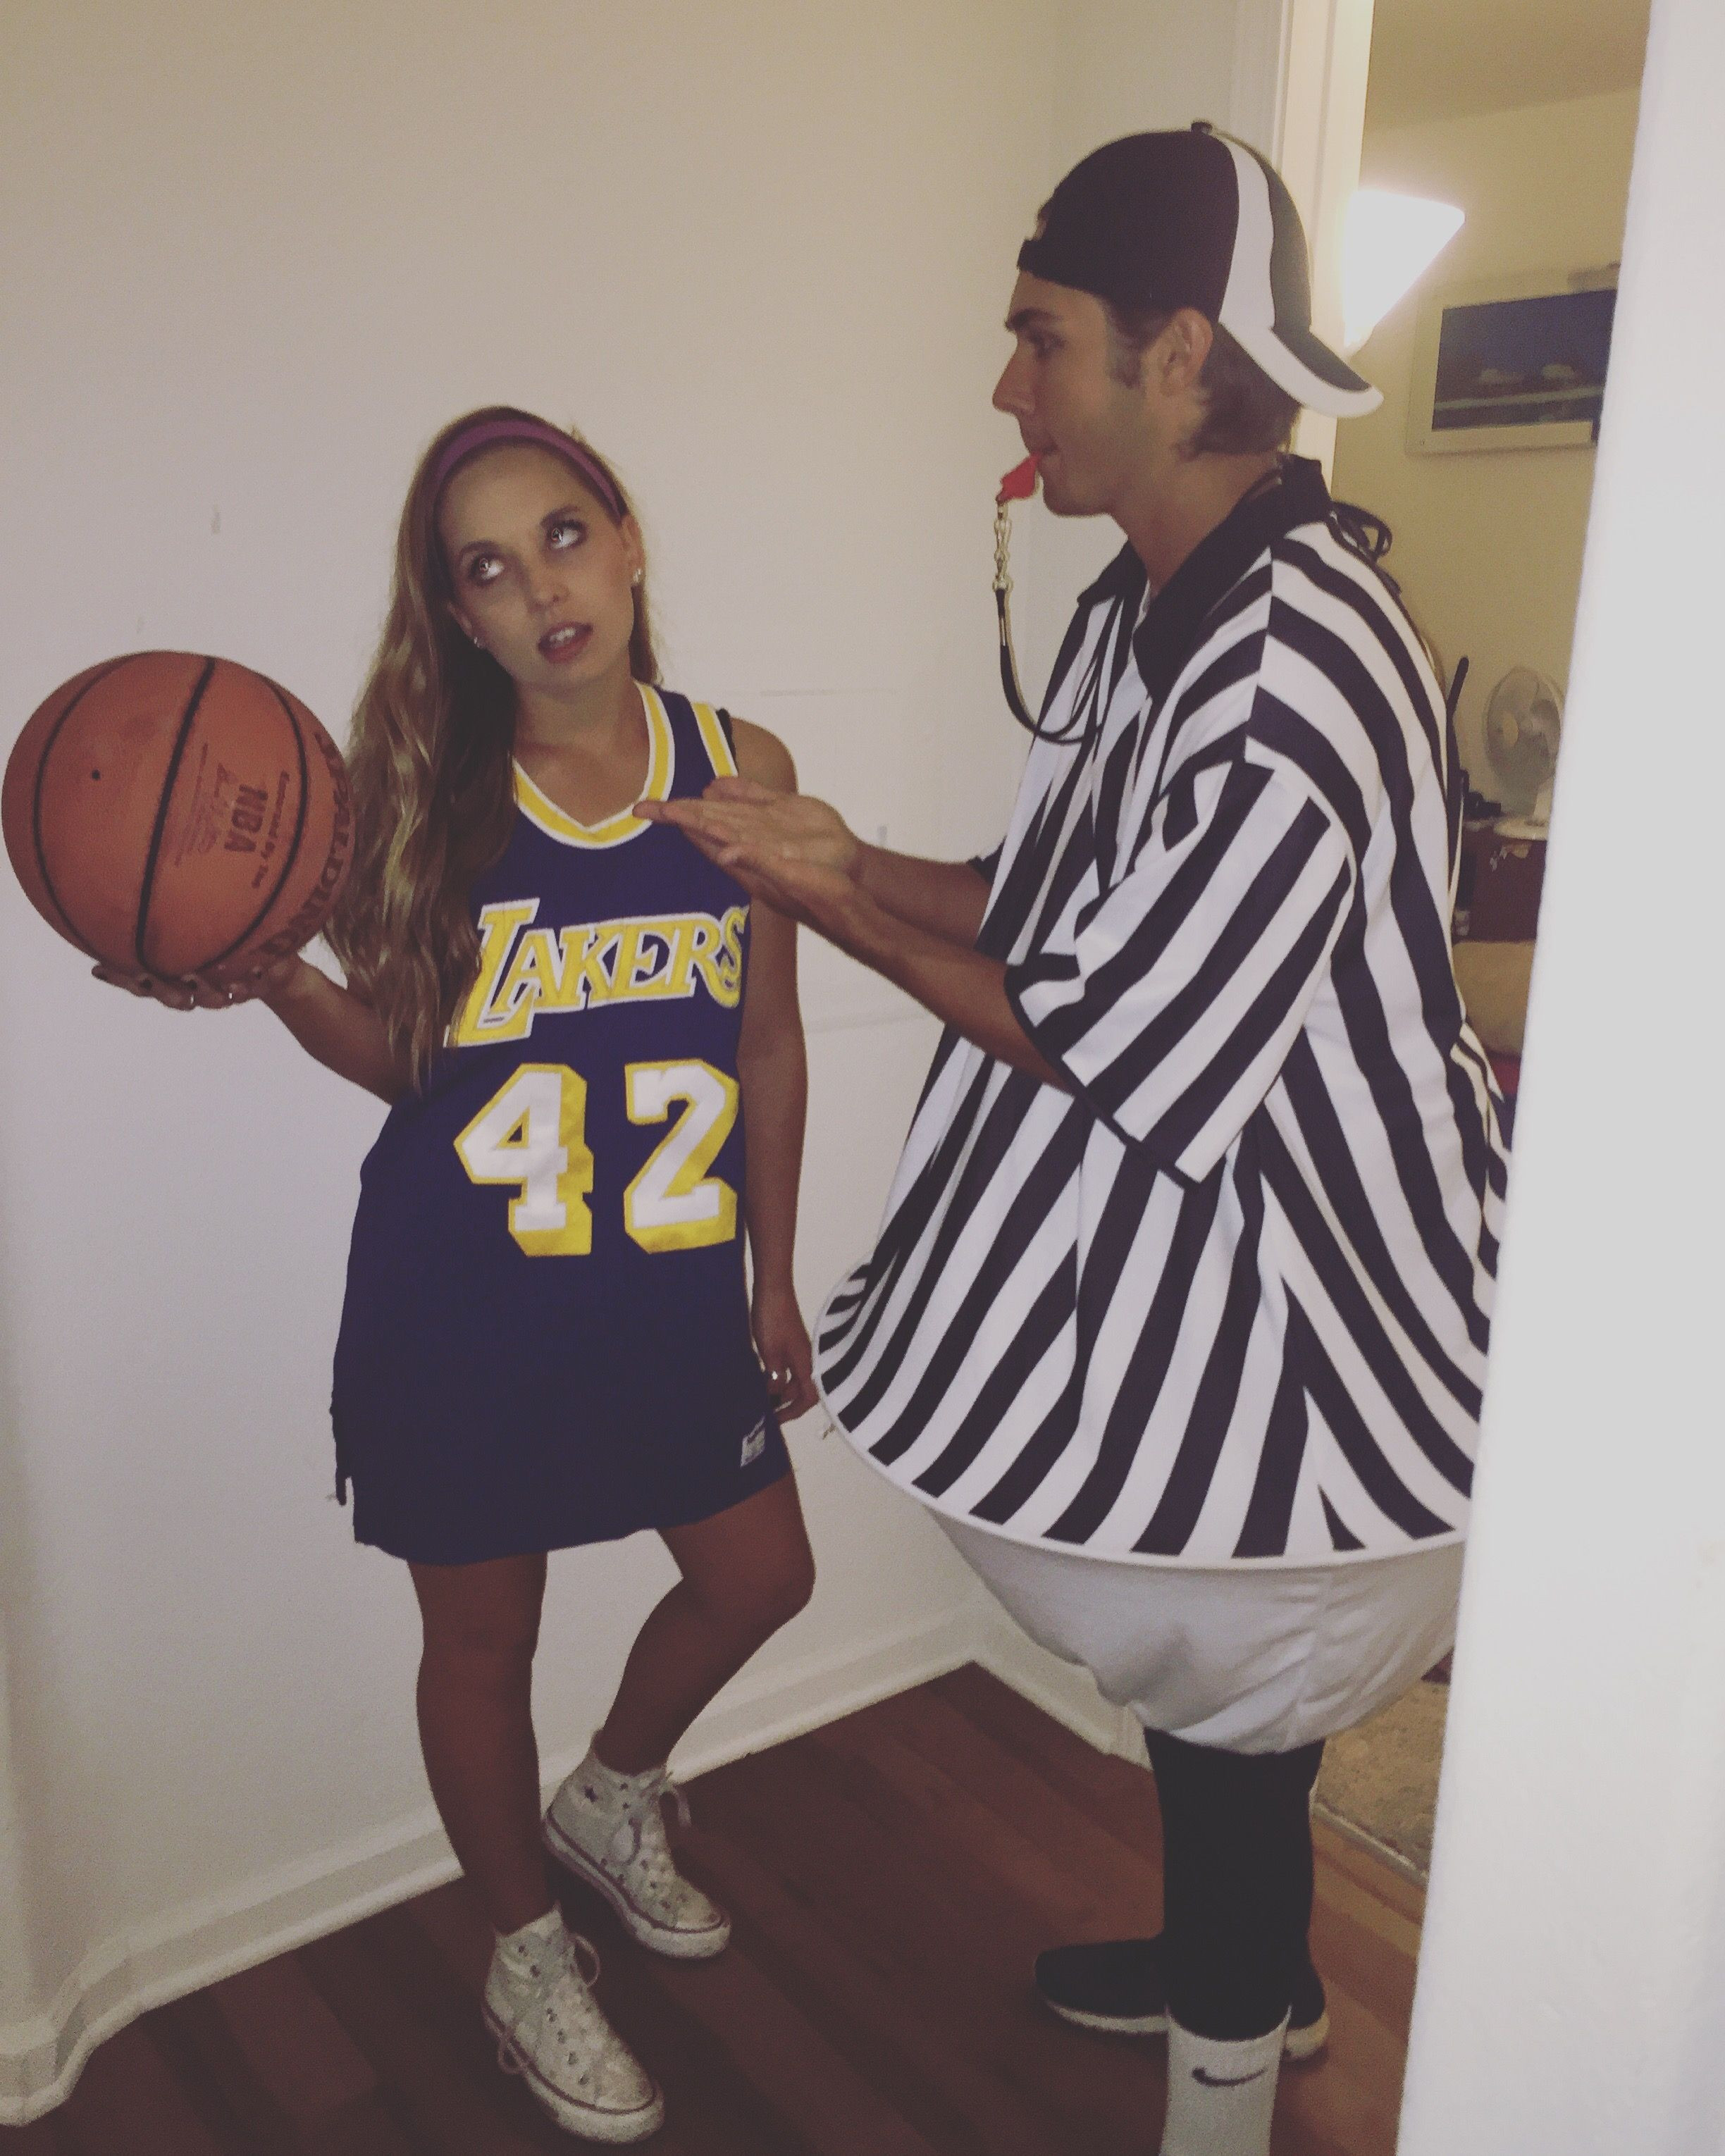 DIY Referee Costume
 Referee and a basketball player DIY costume